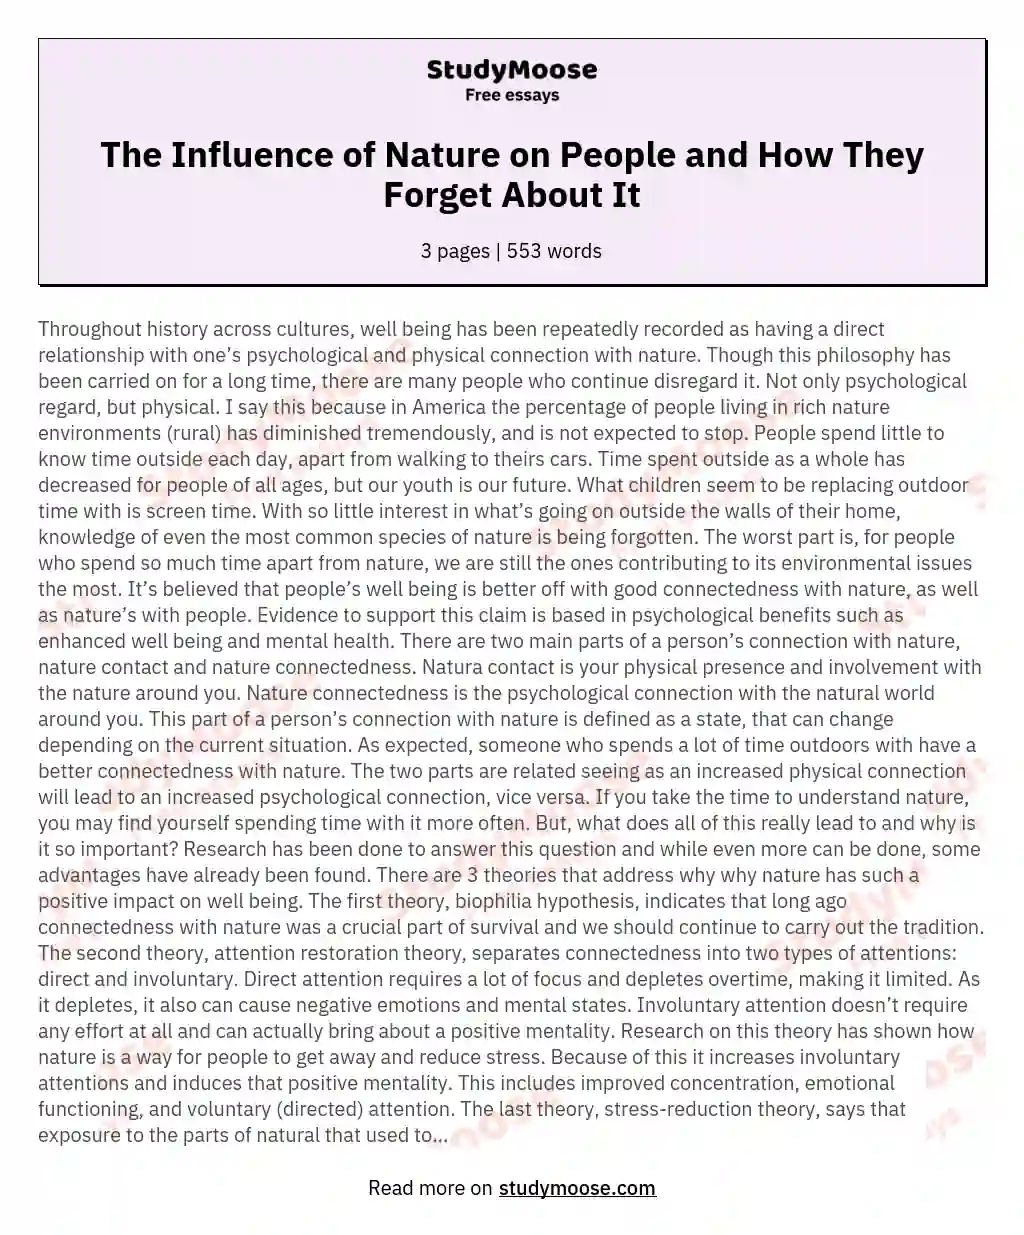 The Influence of Nature on People and How They Forget About It essay